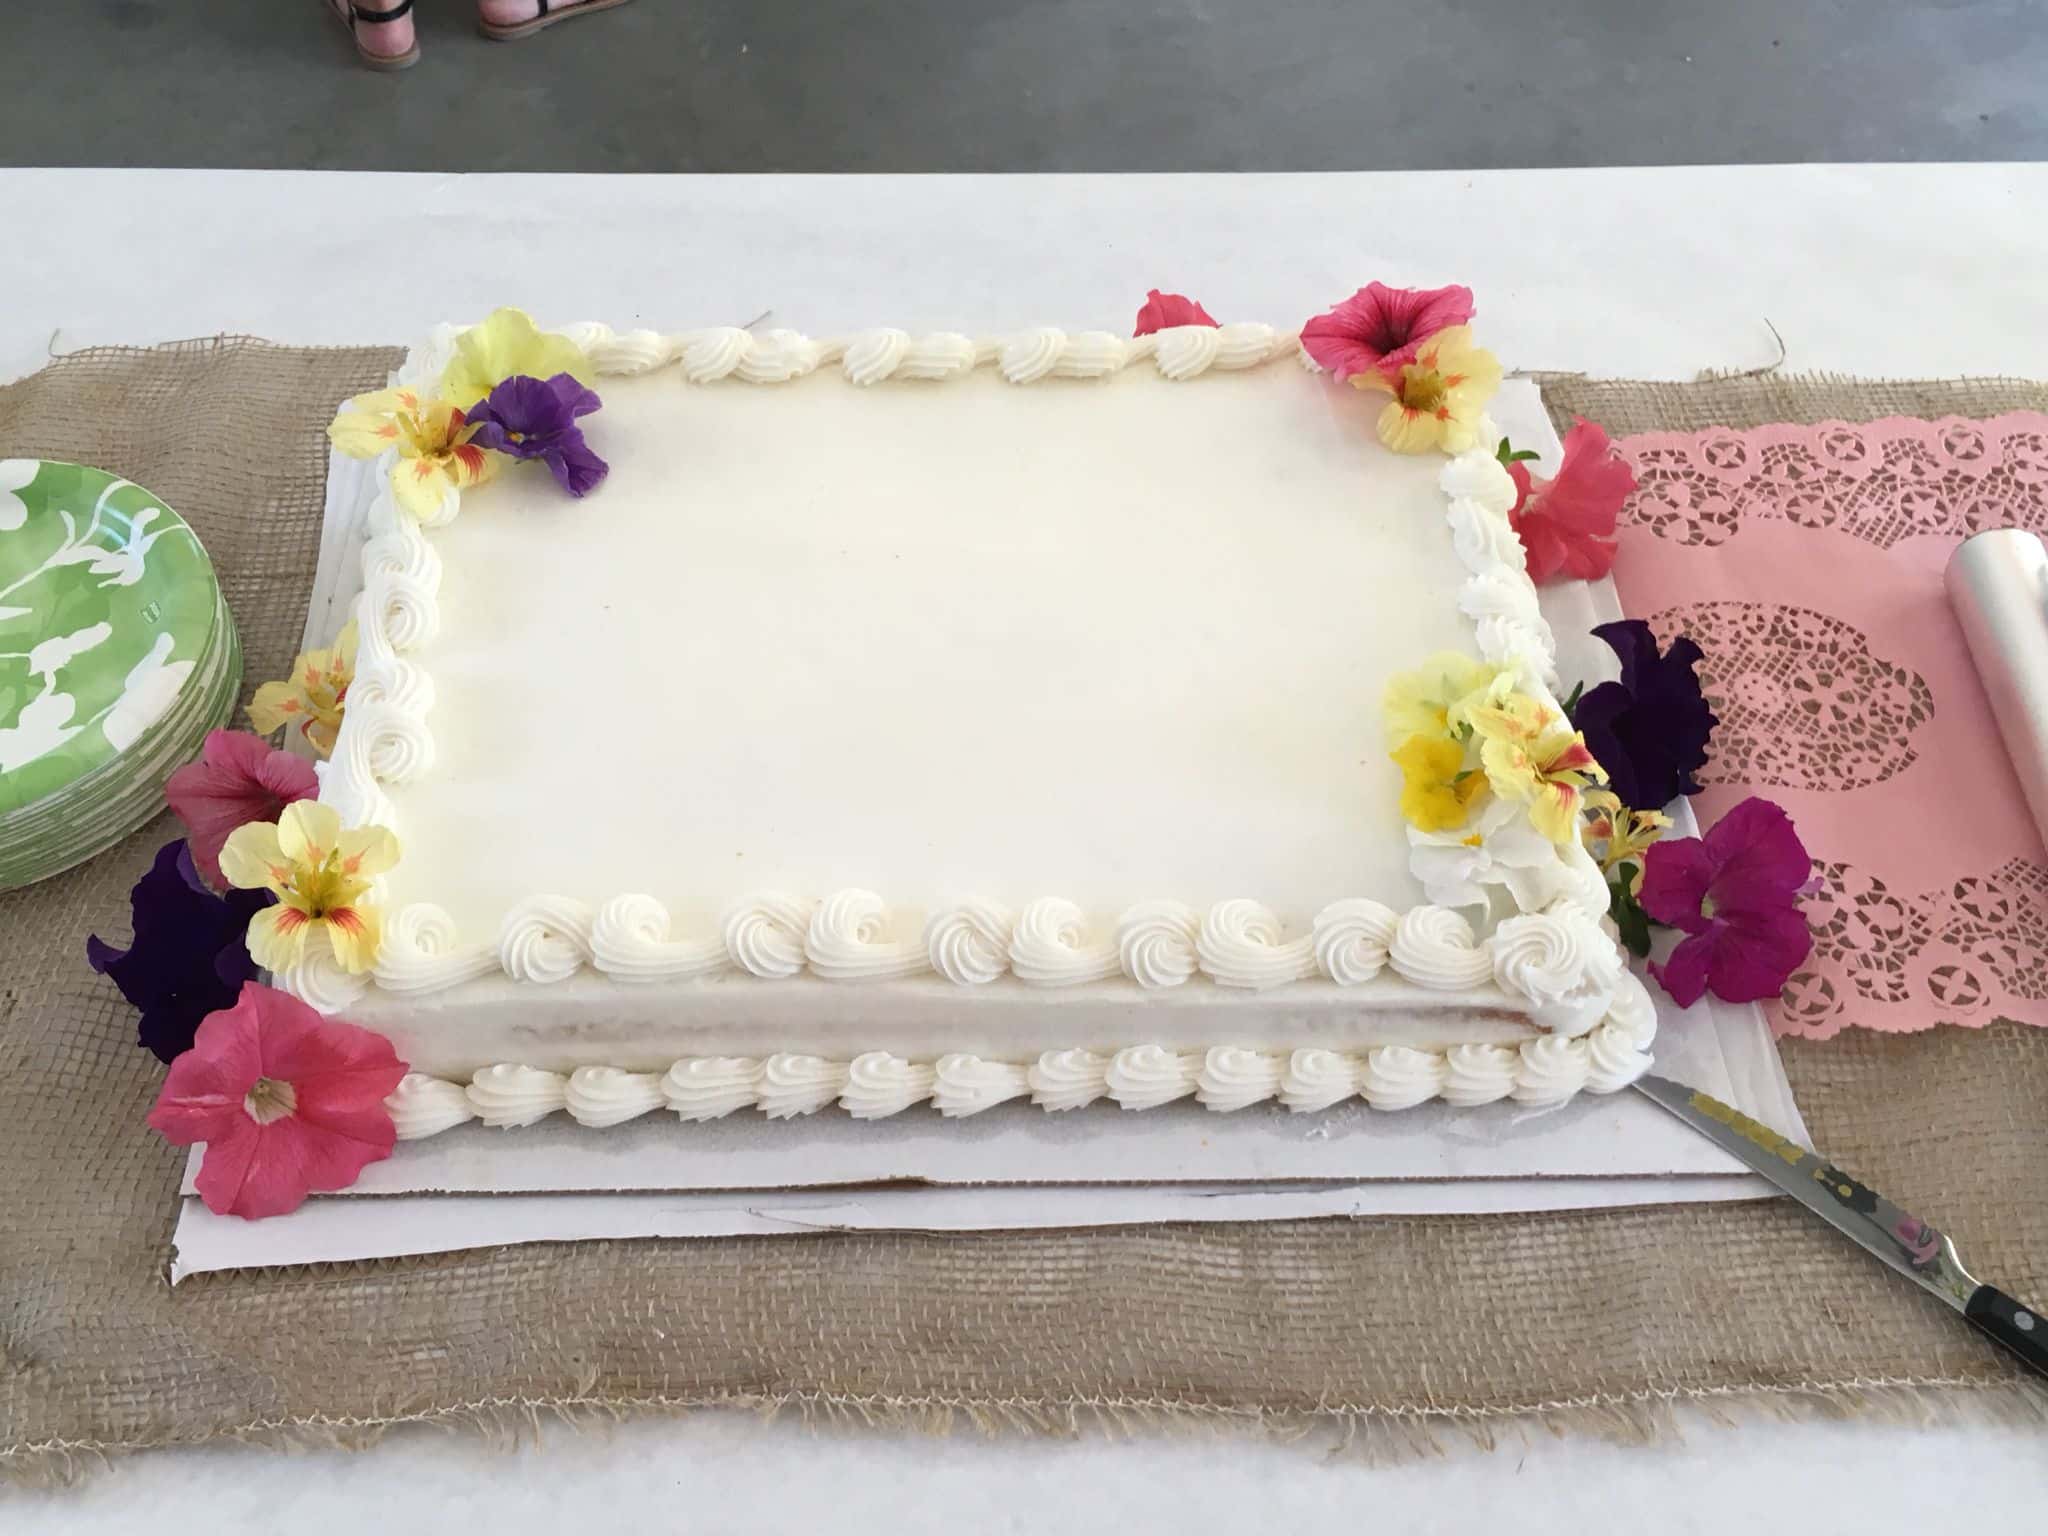 This Costco Birthday Cake Is So Spot On - Funny Costco-Themed Birthday Cake